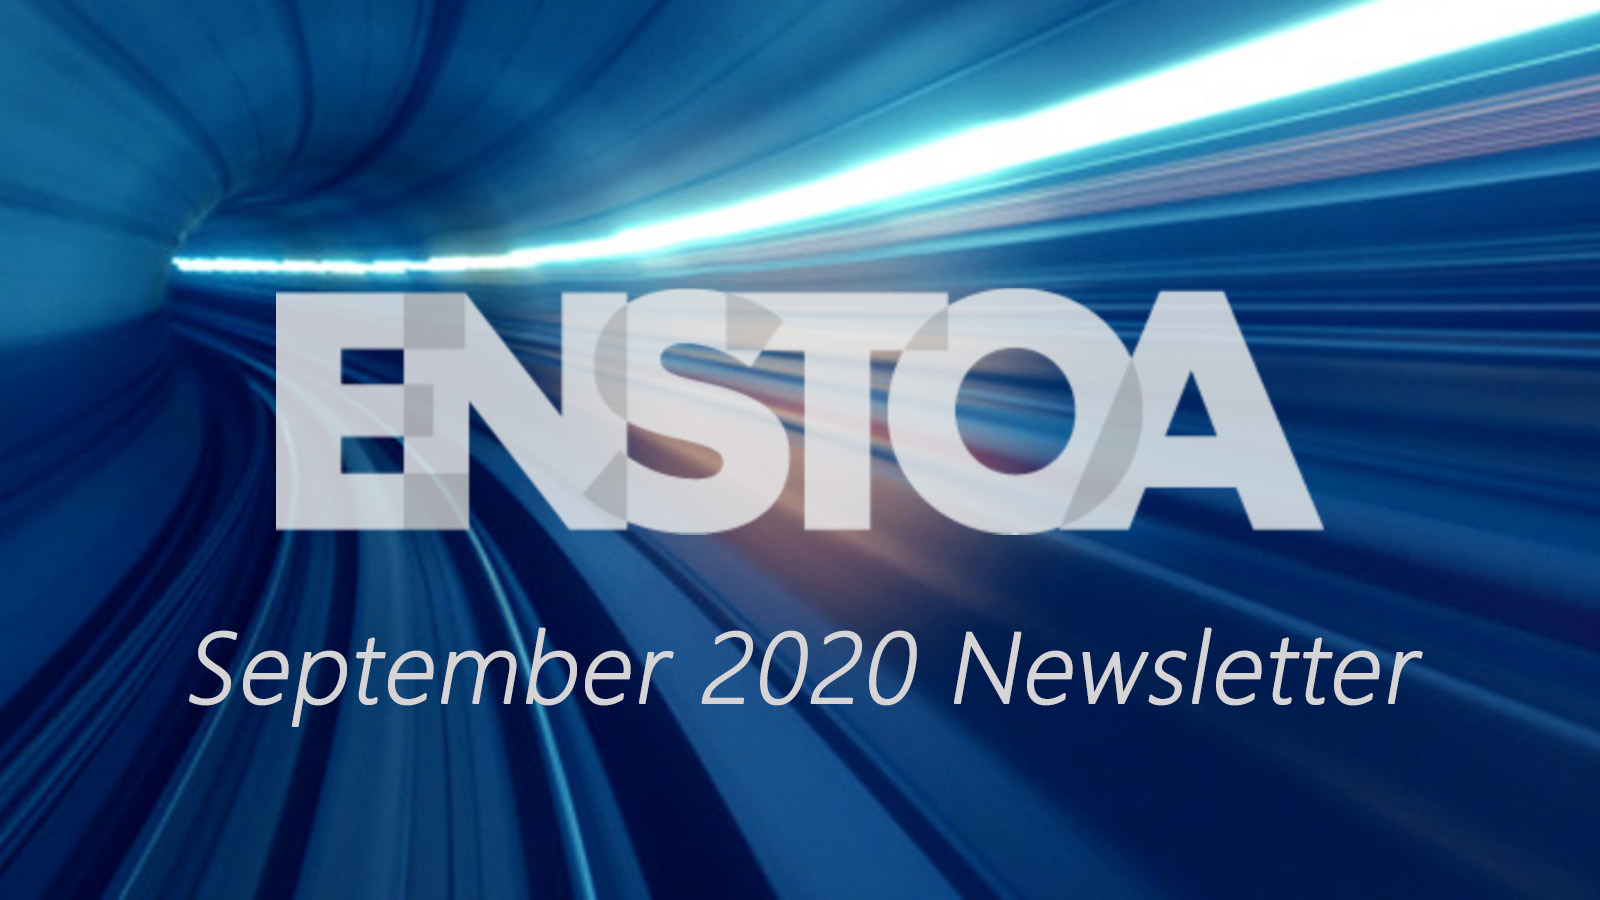 September 2020 Newsletter: It's time to unlock the value of your data